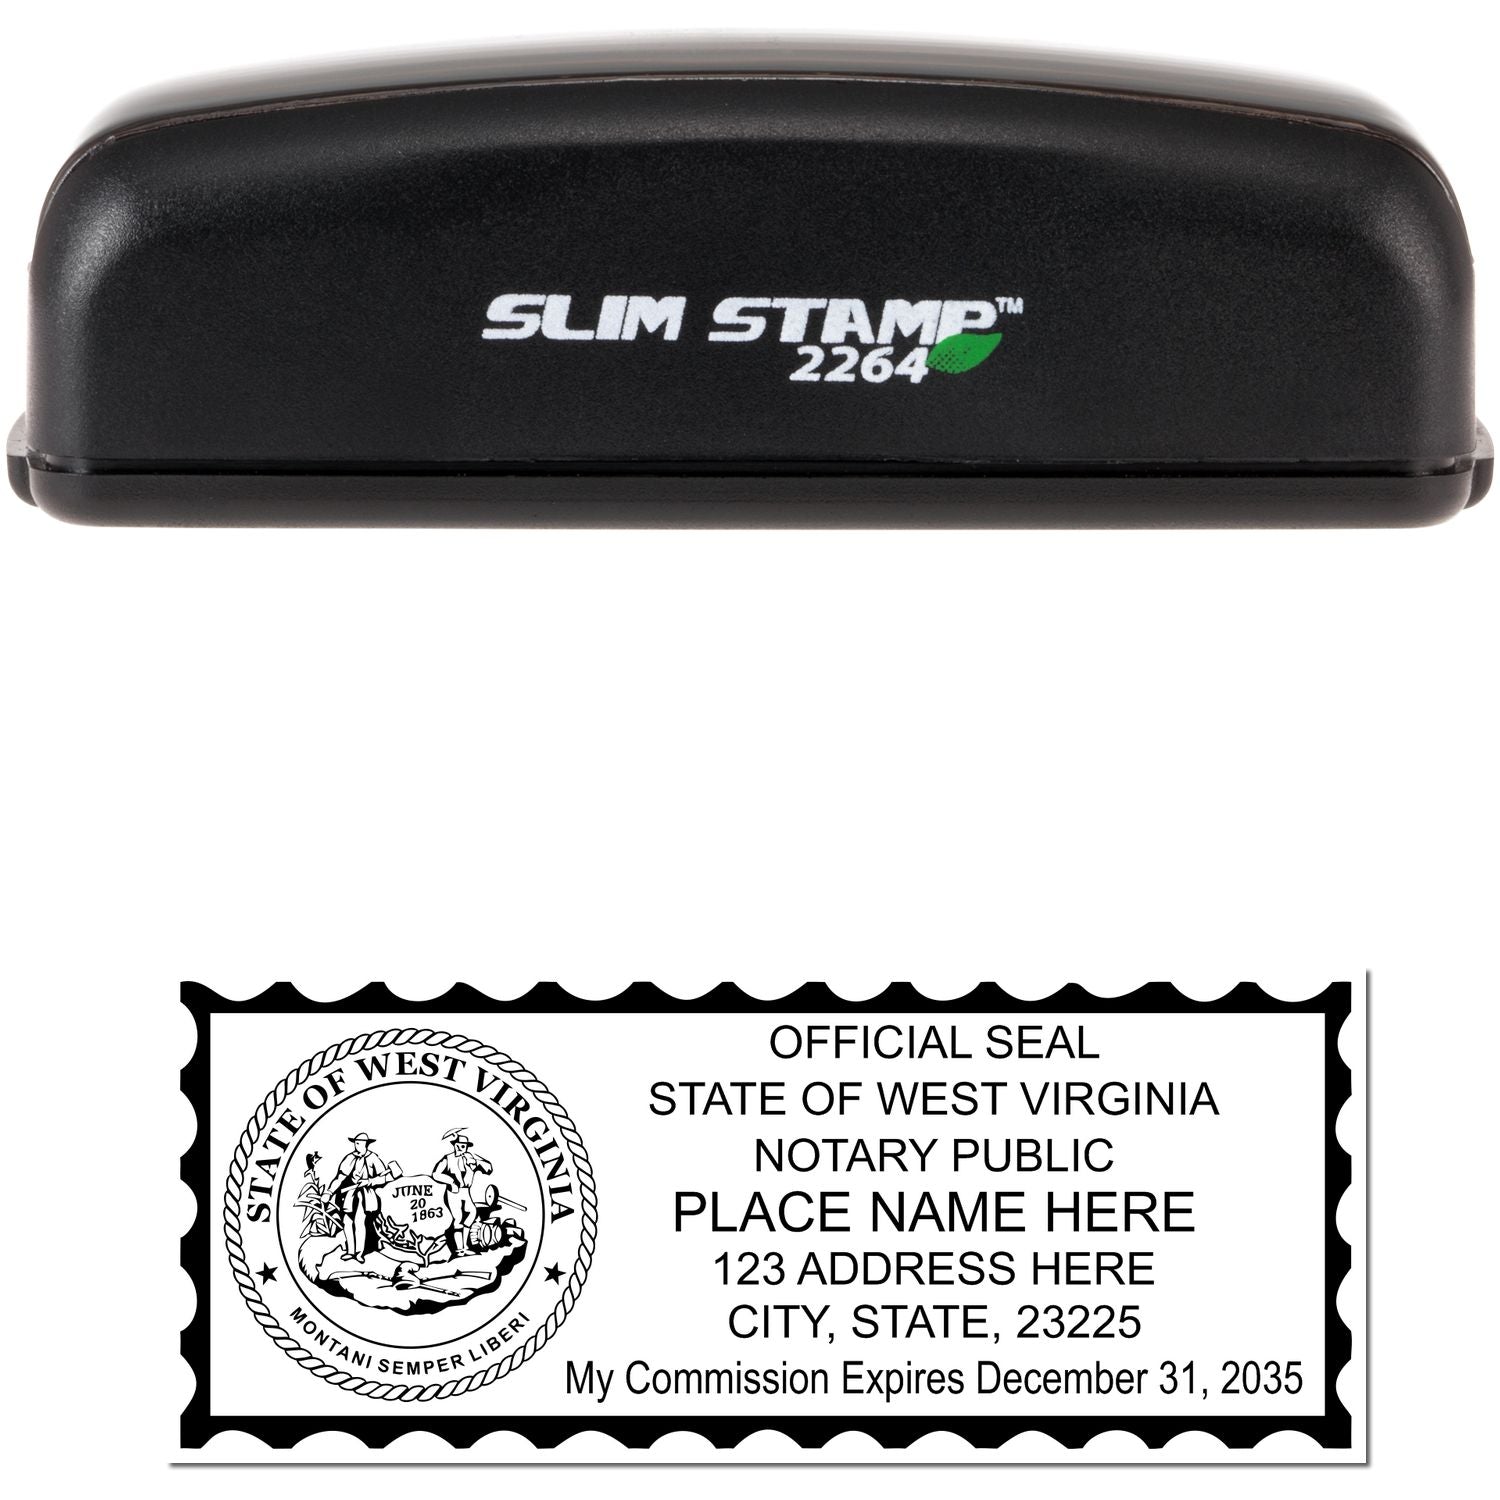 The main image for the Slim Pre-Inked State Seal Notary Stamp for West Virginia depicting a sample of the imprint and electronic files